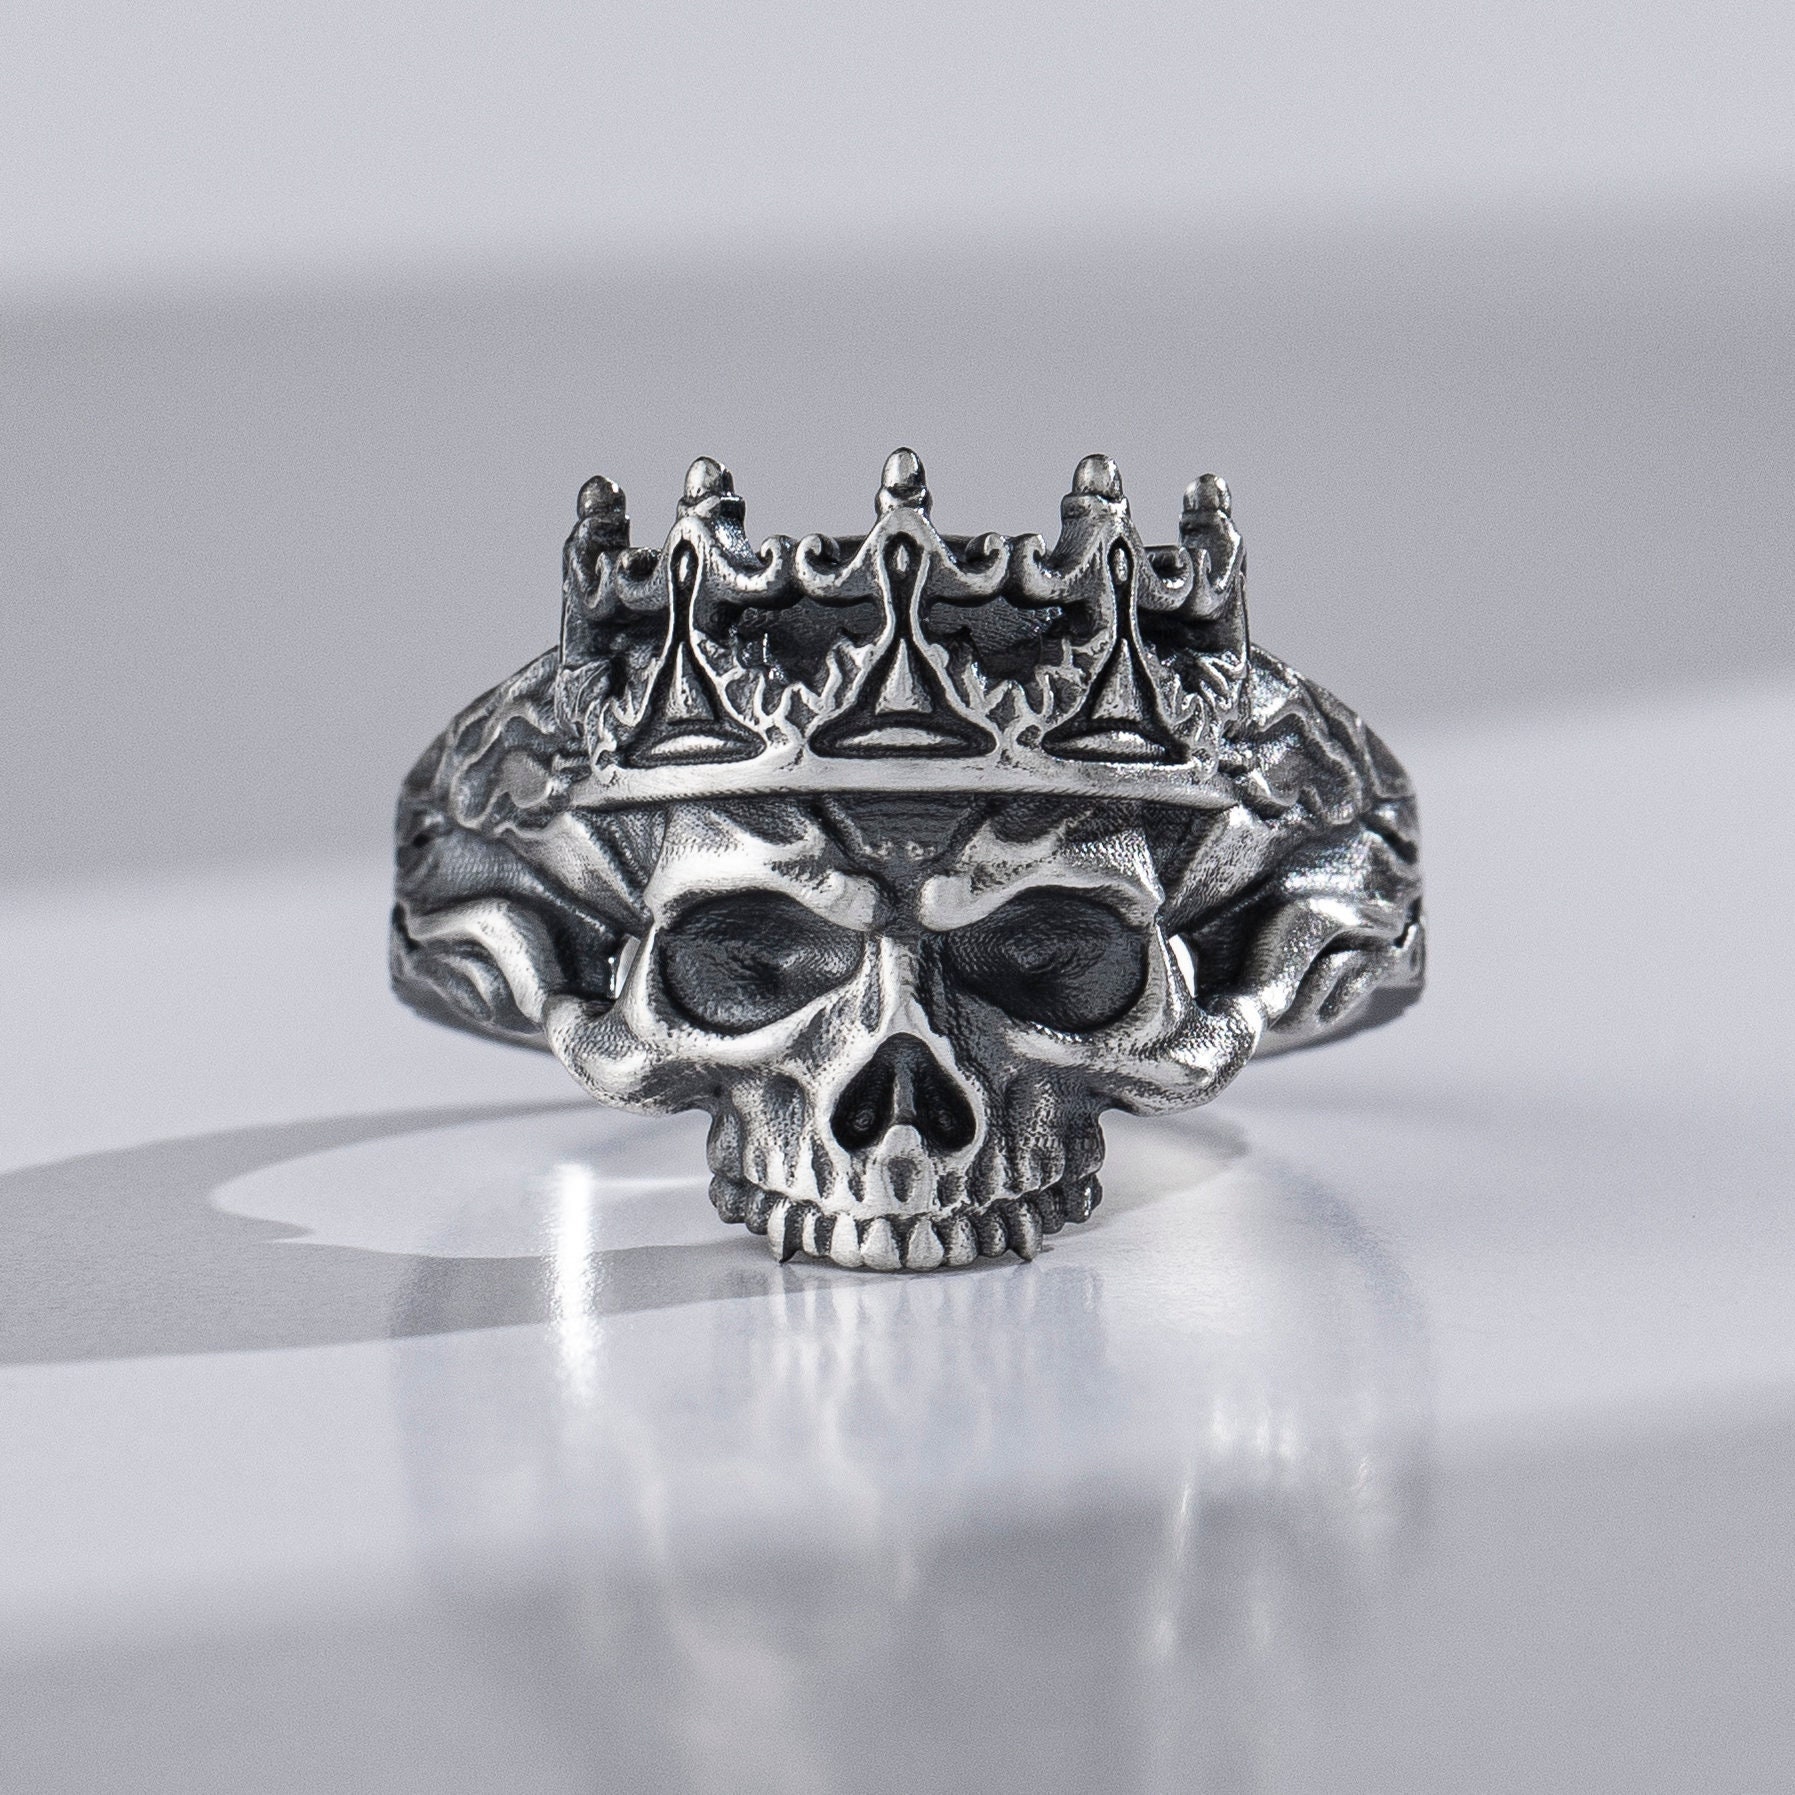 Crystal or Tourmaline Crowned Skull Ring in Solid Silver with Topaz Eyes,  Mens Silver Ring, Silver Skull Ring